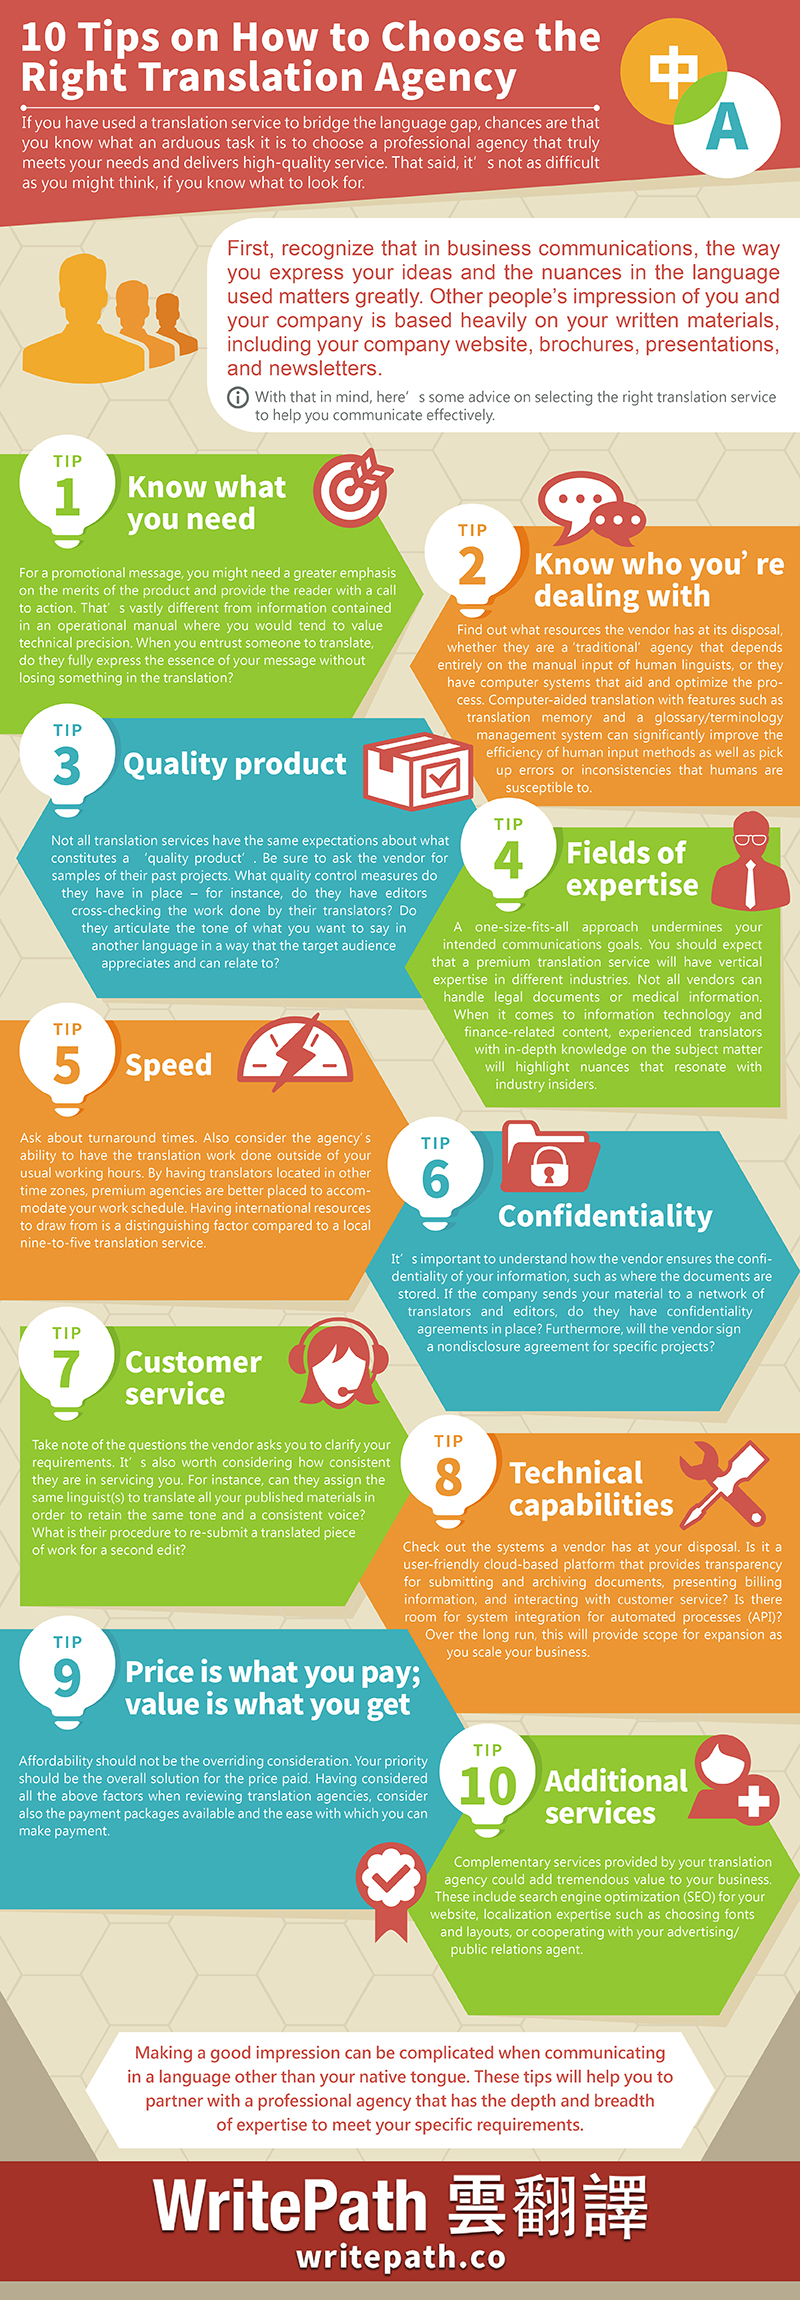 [Infographic] 10 Tips on How to Choose the Right Translation Agency